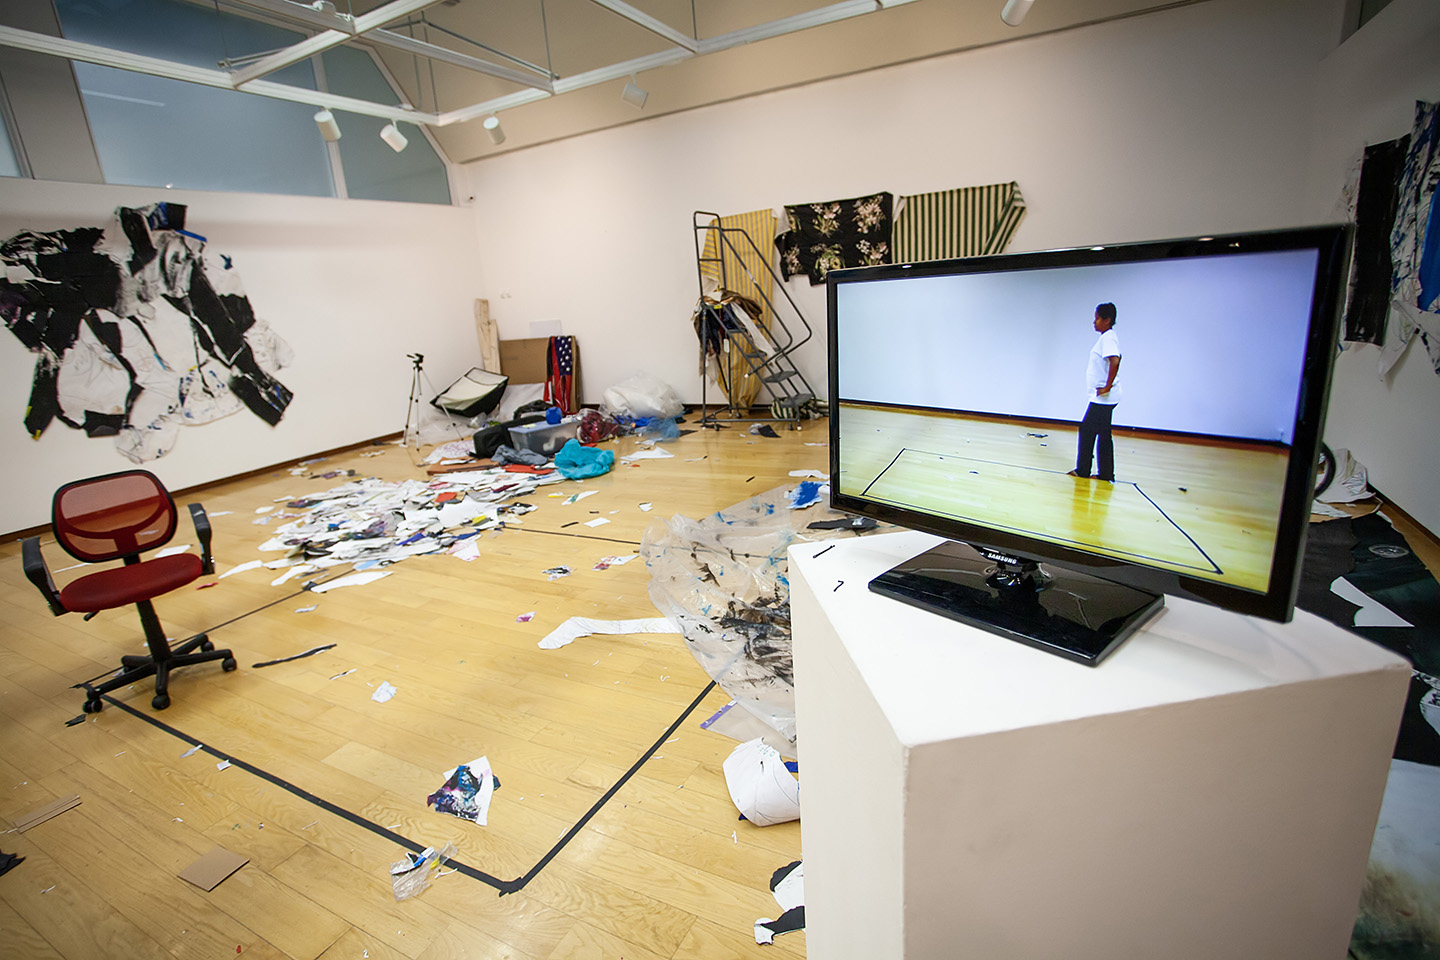 white-walled, wood floor gallery space strewn with piles of paper and other material; on the far wall is a large paper collage, on the back wall three patterned fabrics are hanging; in the foreground, a video screen on a pedestal shows a person walking along a square marked on the floor